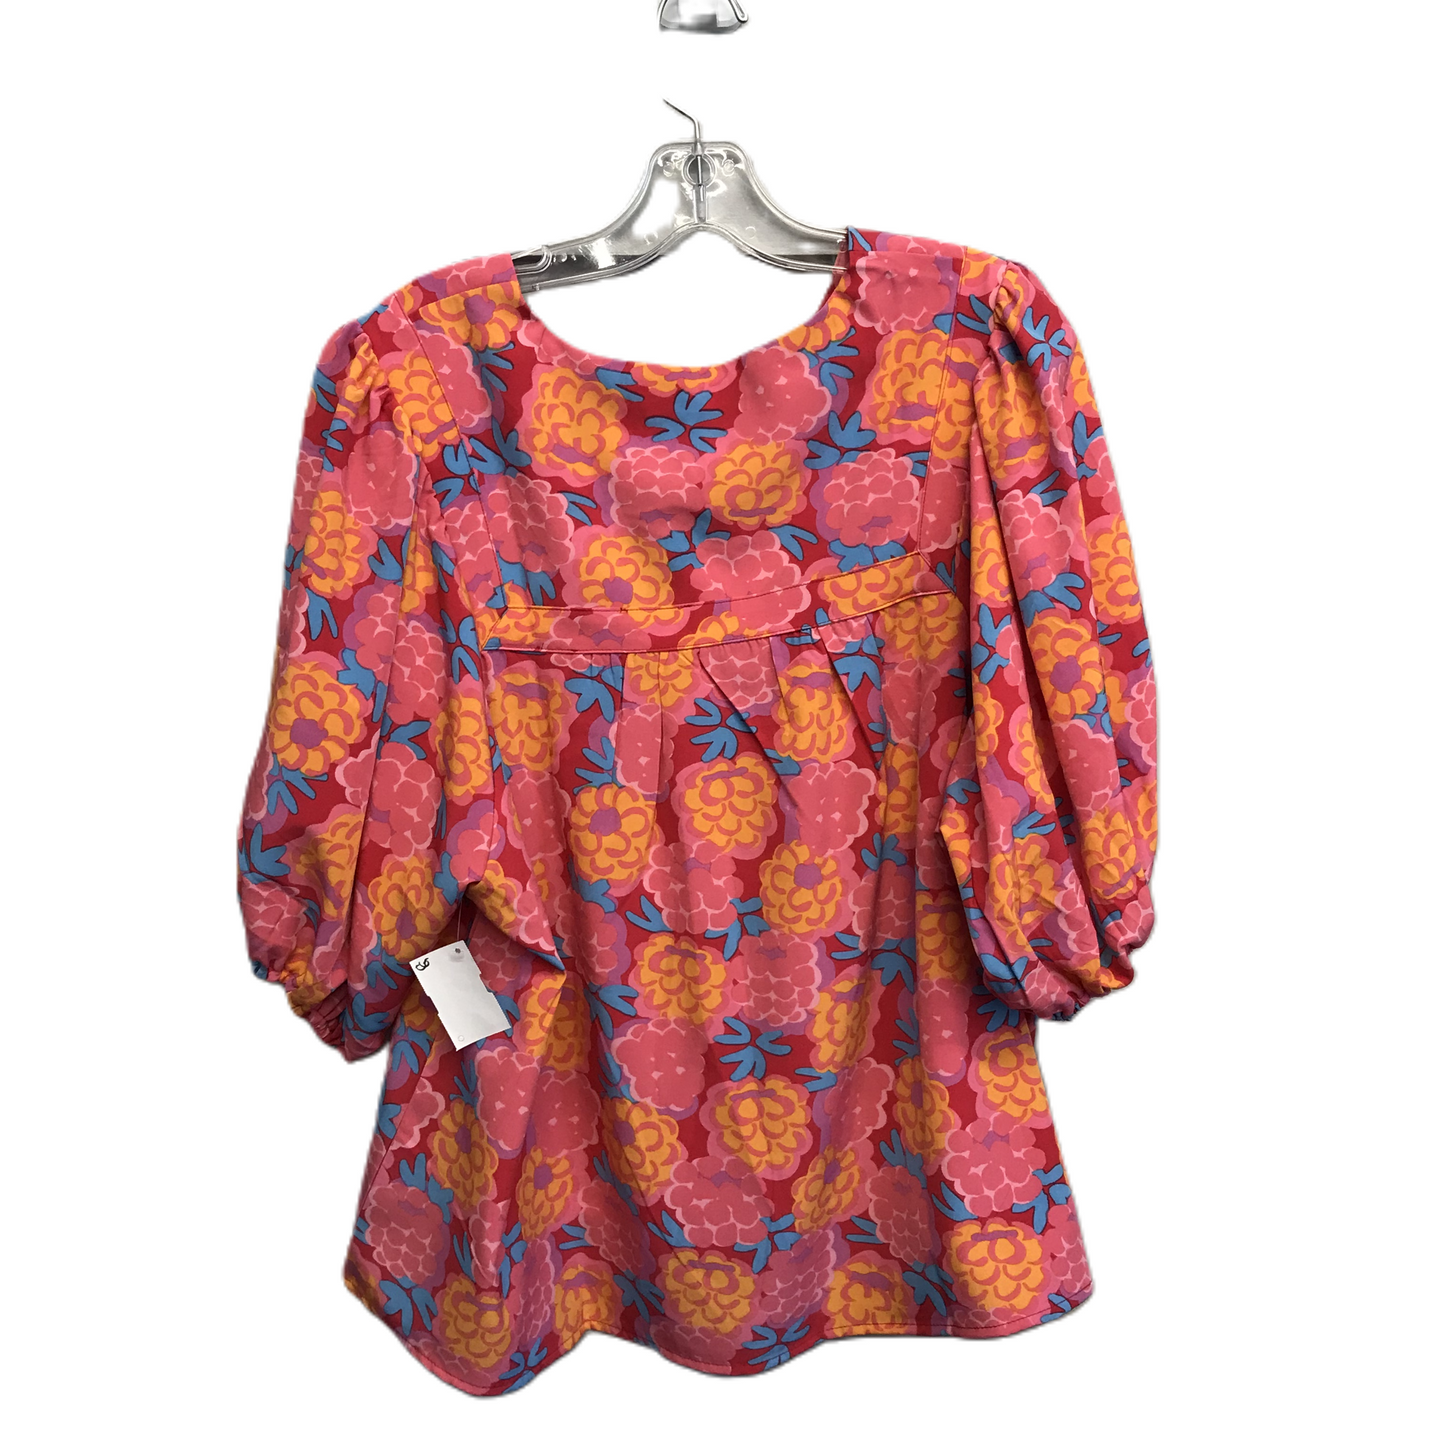 Floral Print Top 3/4 Sleeve By Michelle McDowell, Size: L